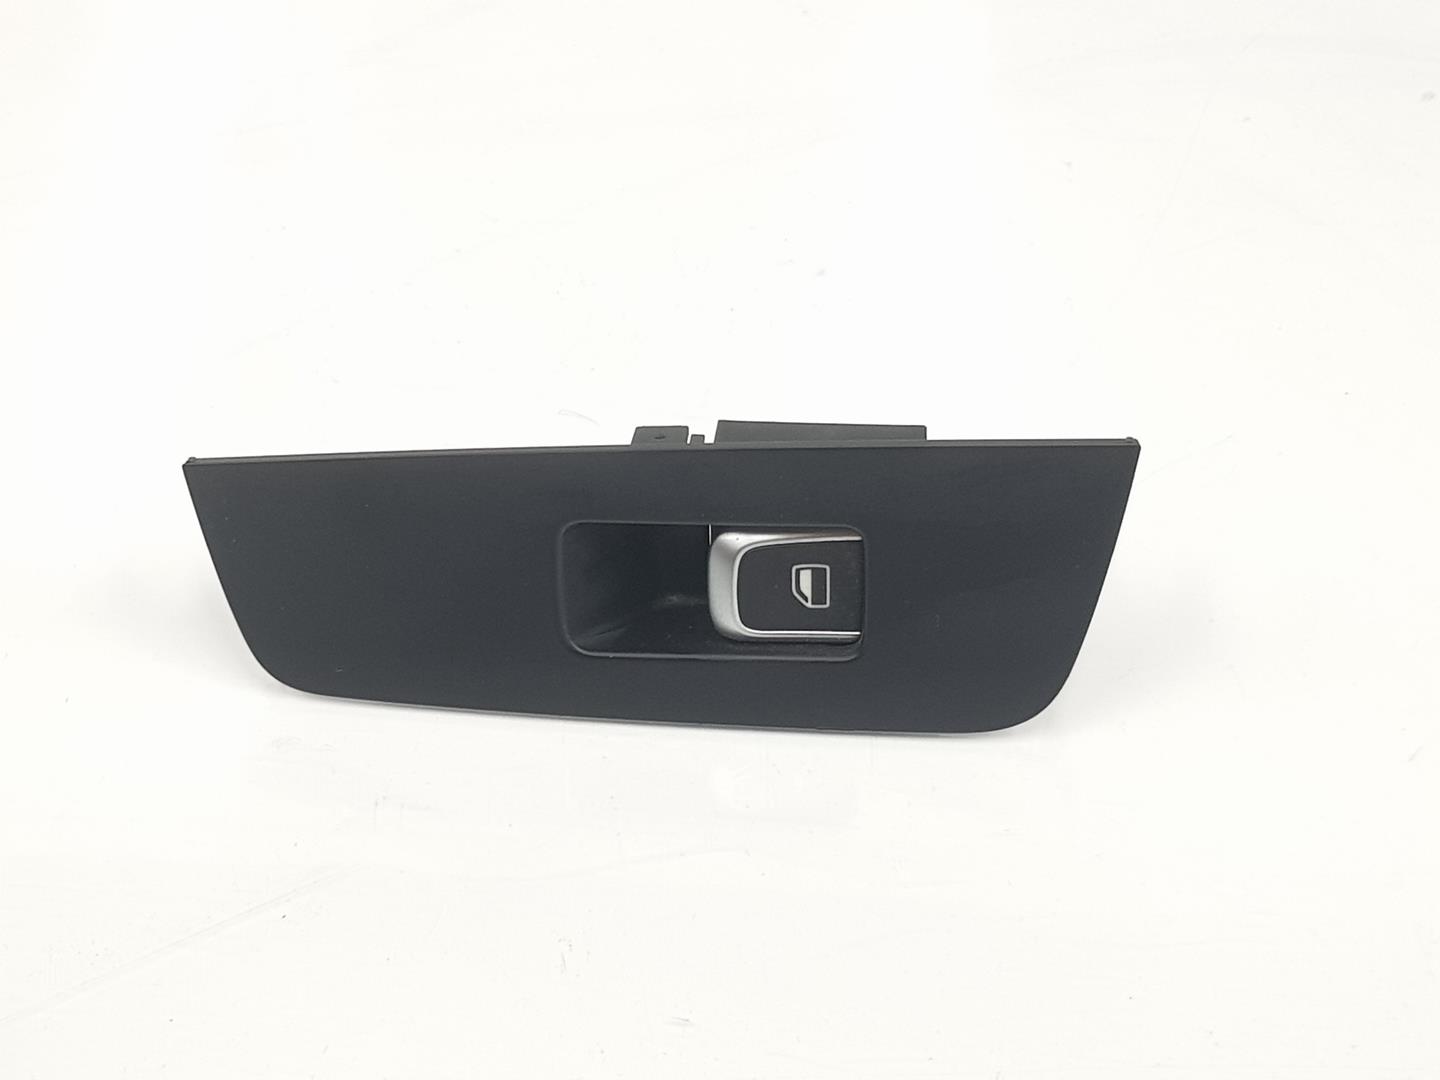 AUDI A7 C7/4G (2010-2020) Rear Right Door Window Control Switch 4H0959855A, 4H0959855A 19779218